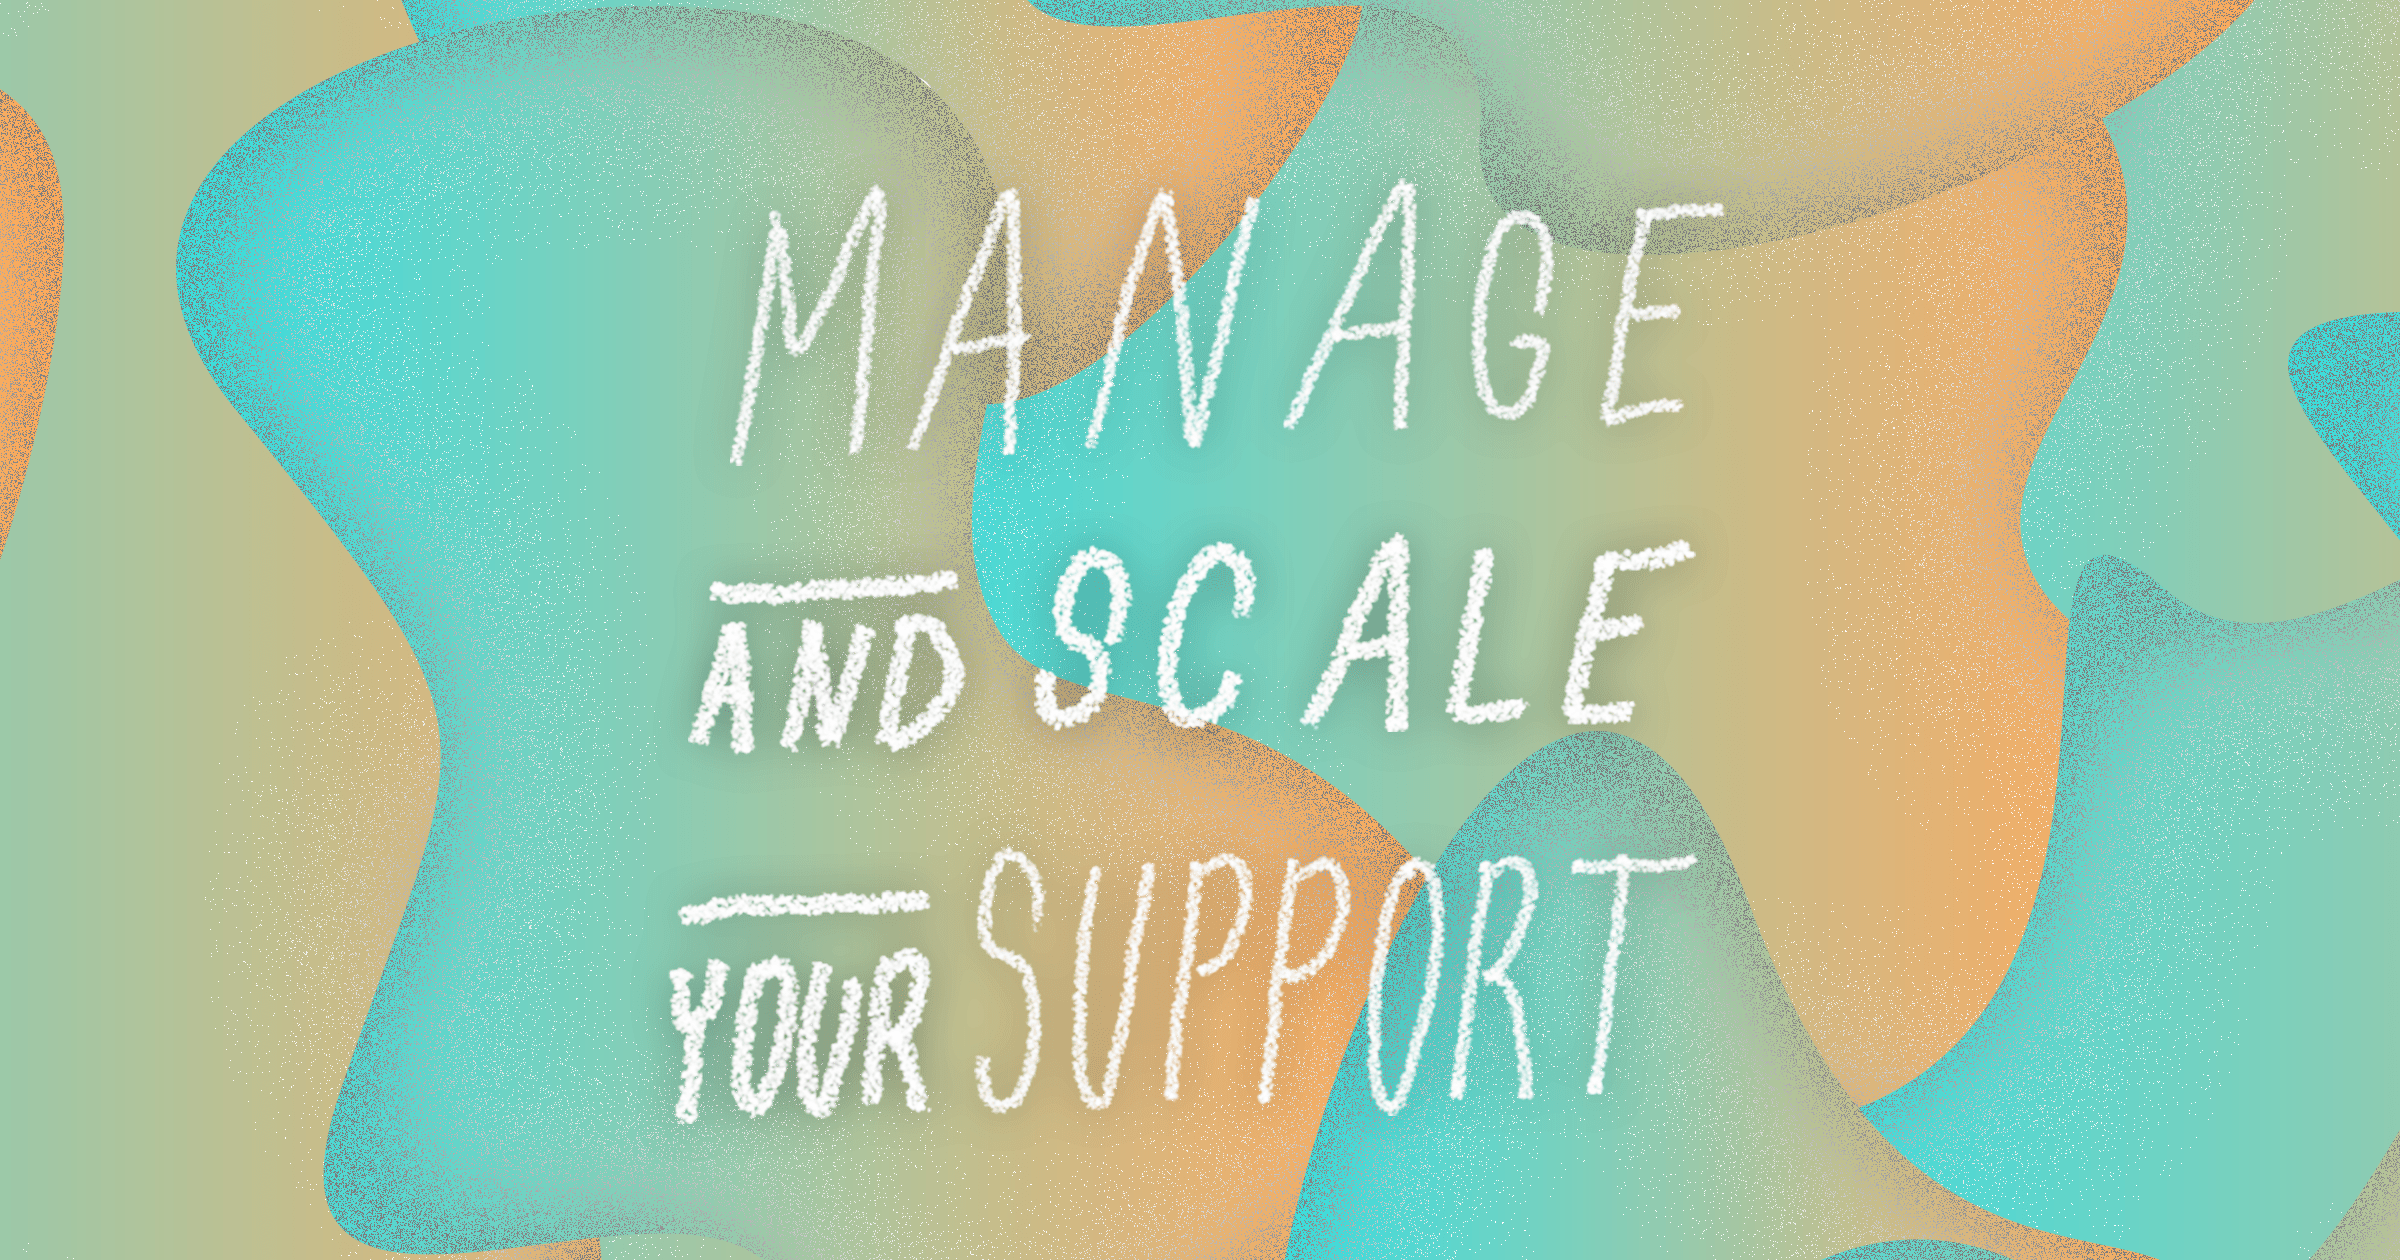 Cover image of Manage and Scale Your Support